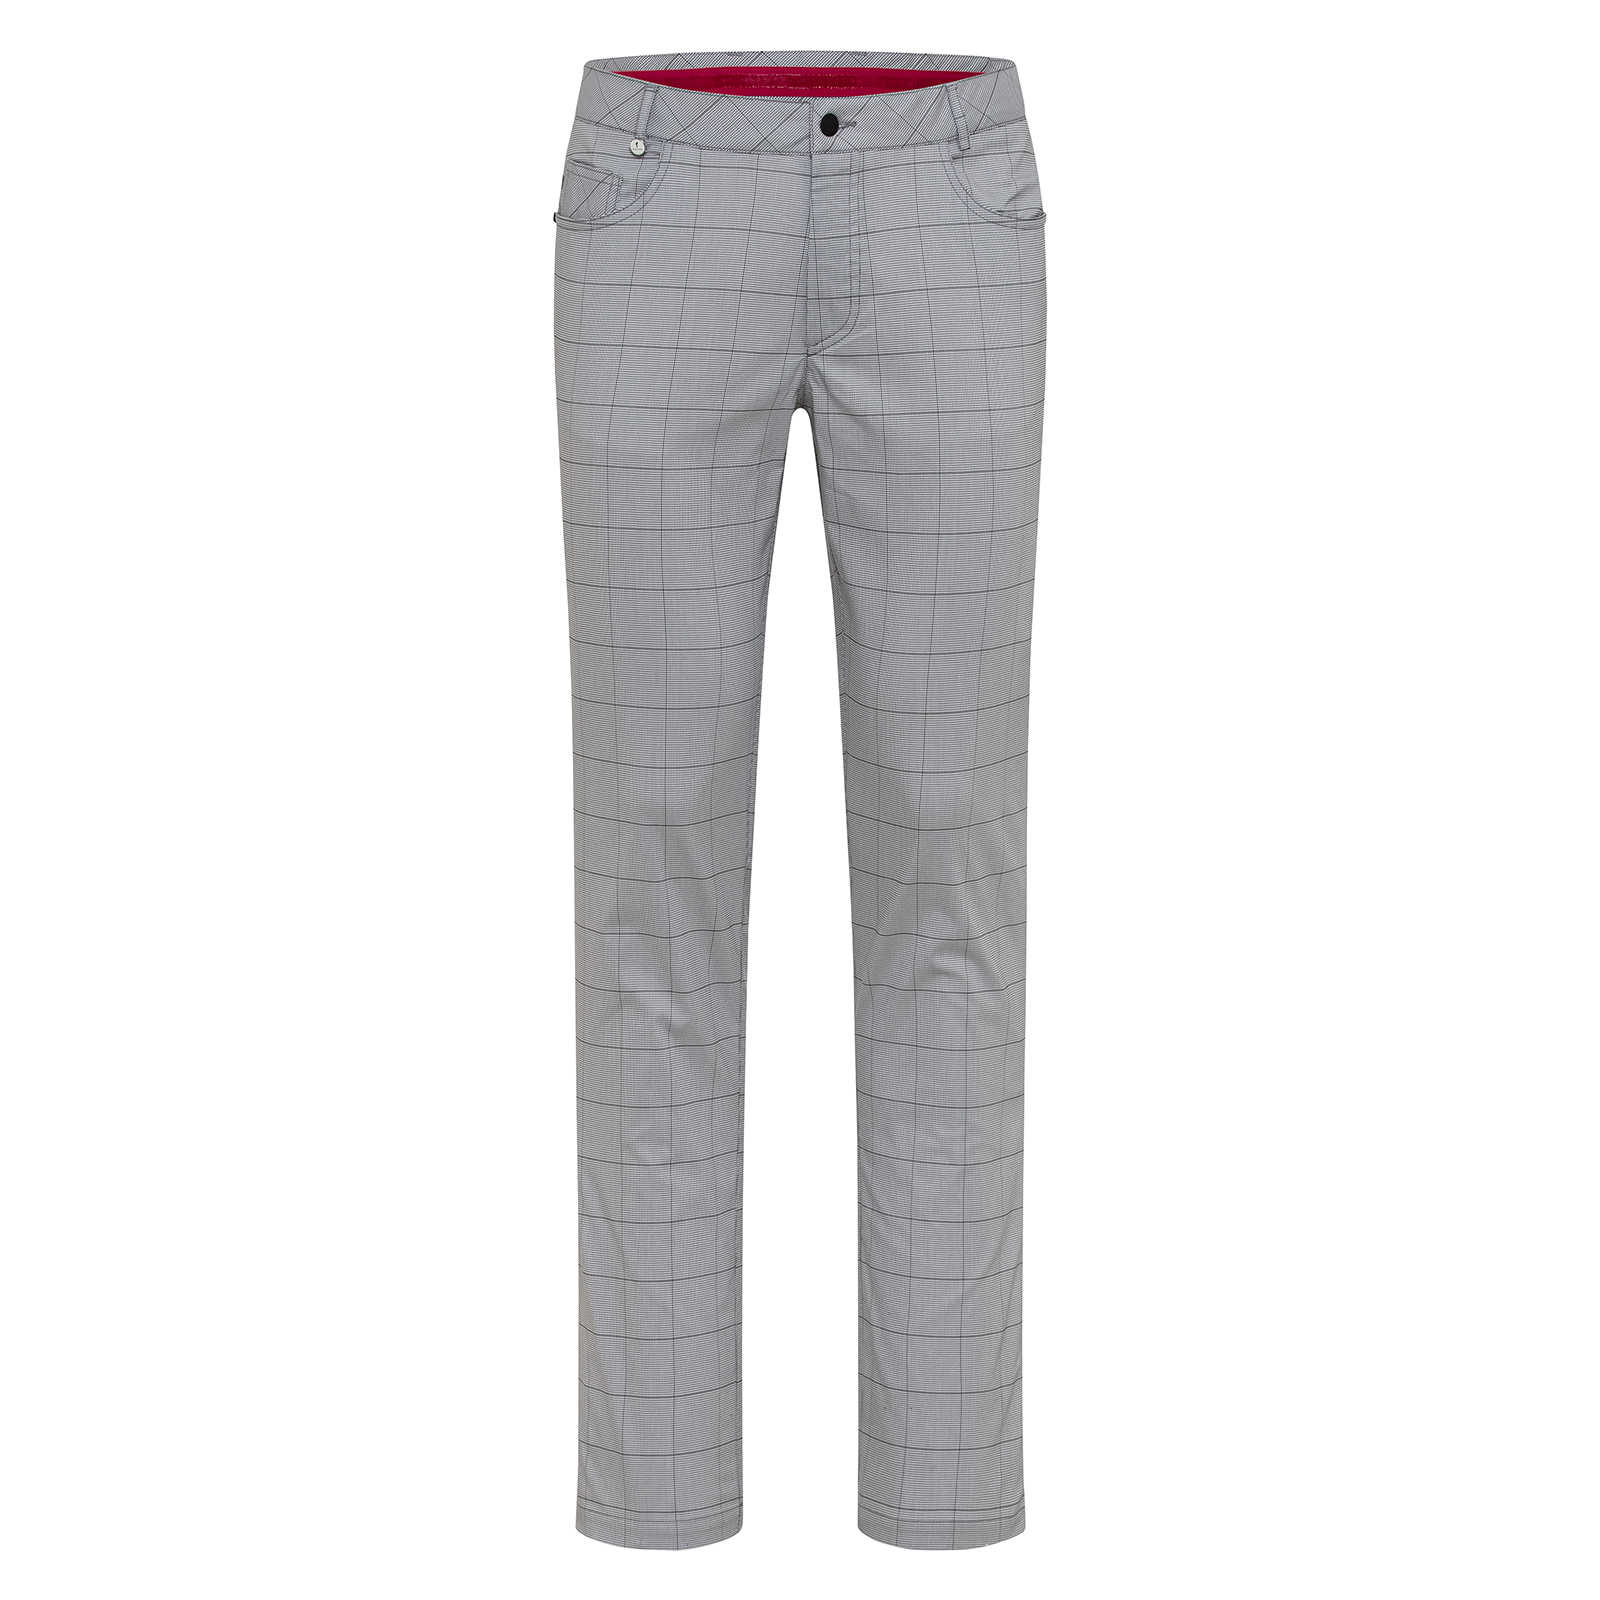 Men's extra slim fit checked 5-pocket golf trousers 